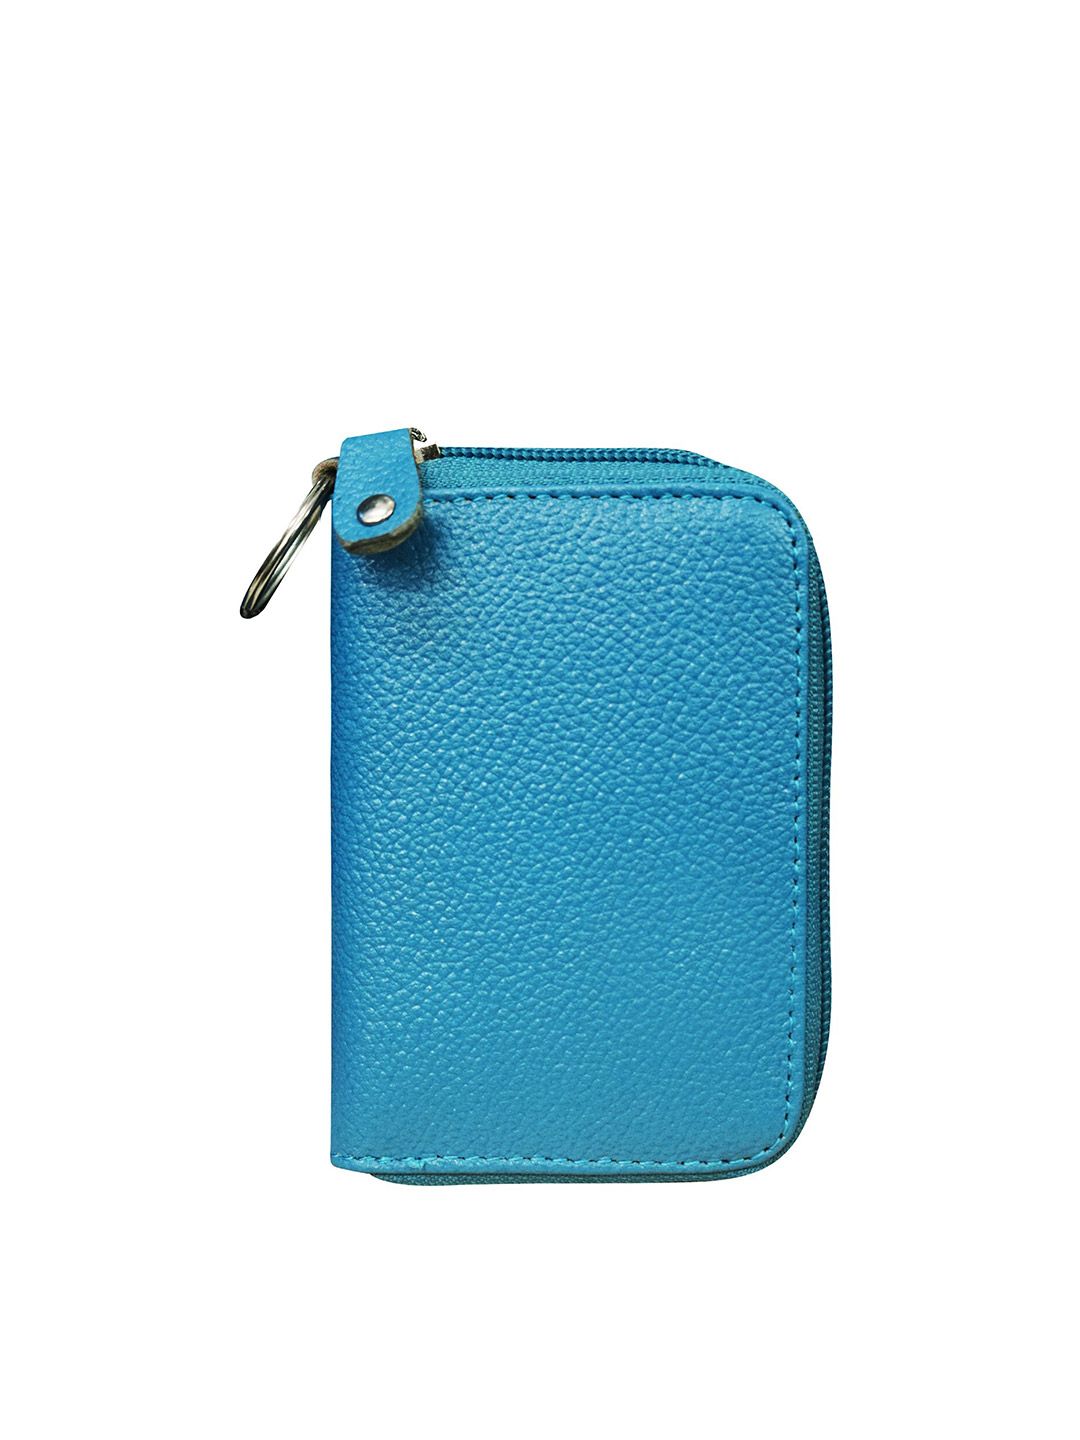 ABYS Unisex Turquoise Blue Leather Card Holder Price in India